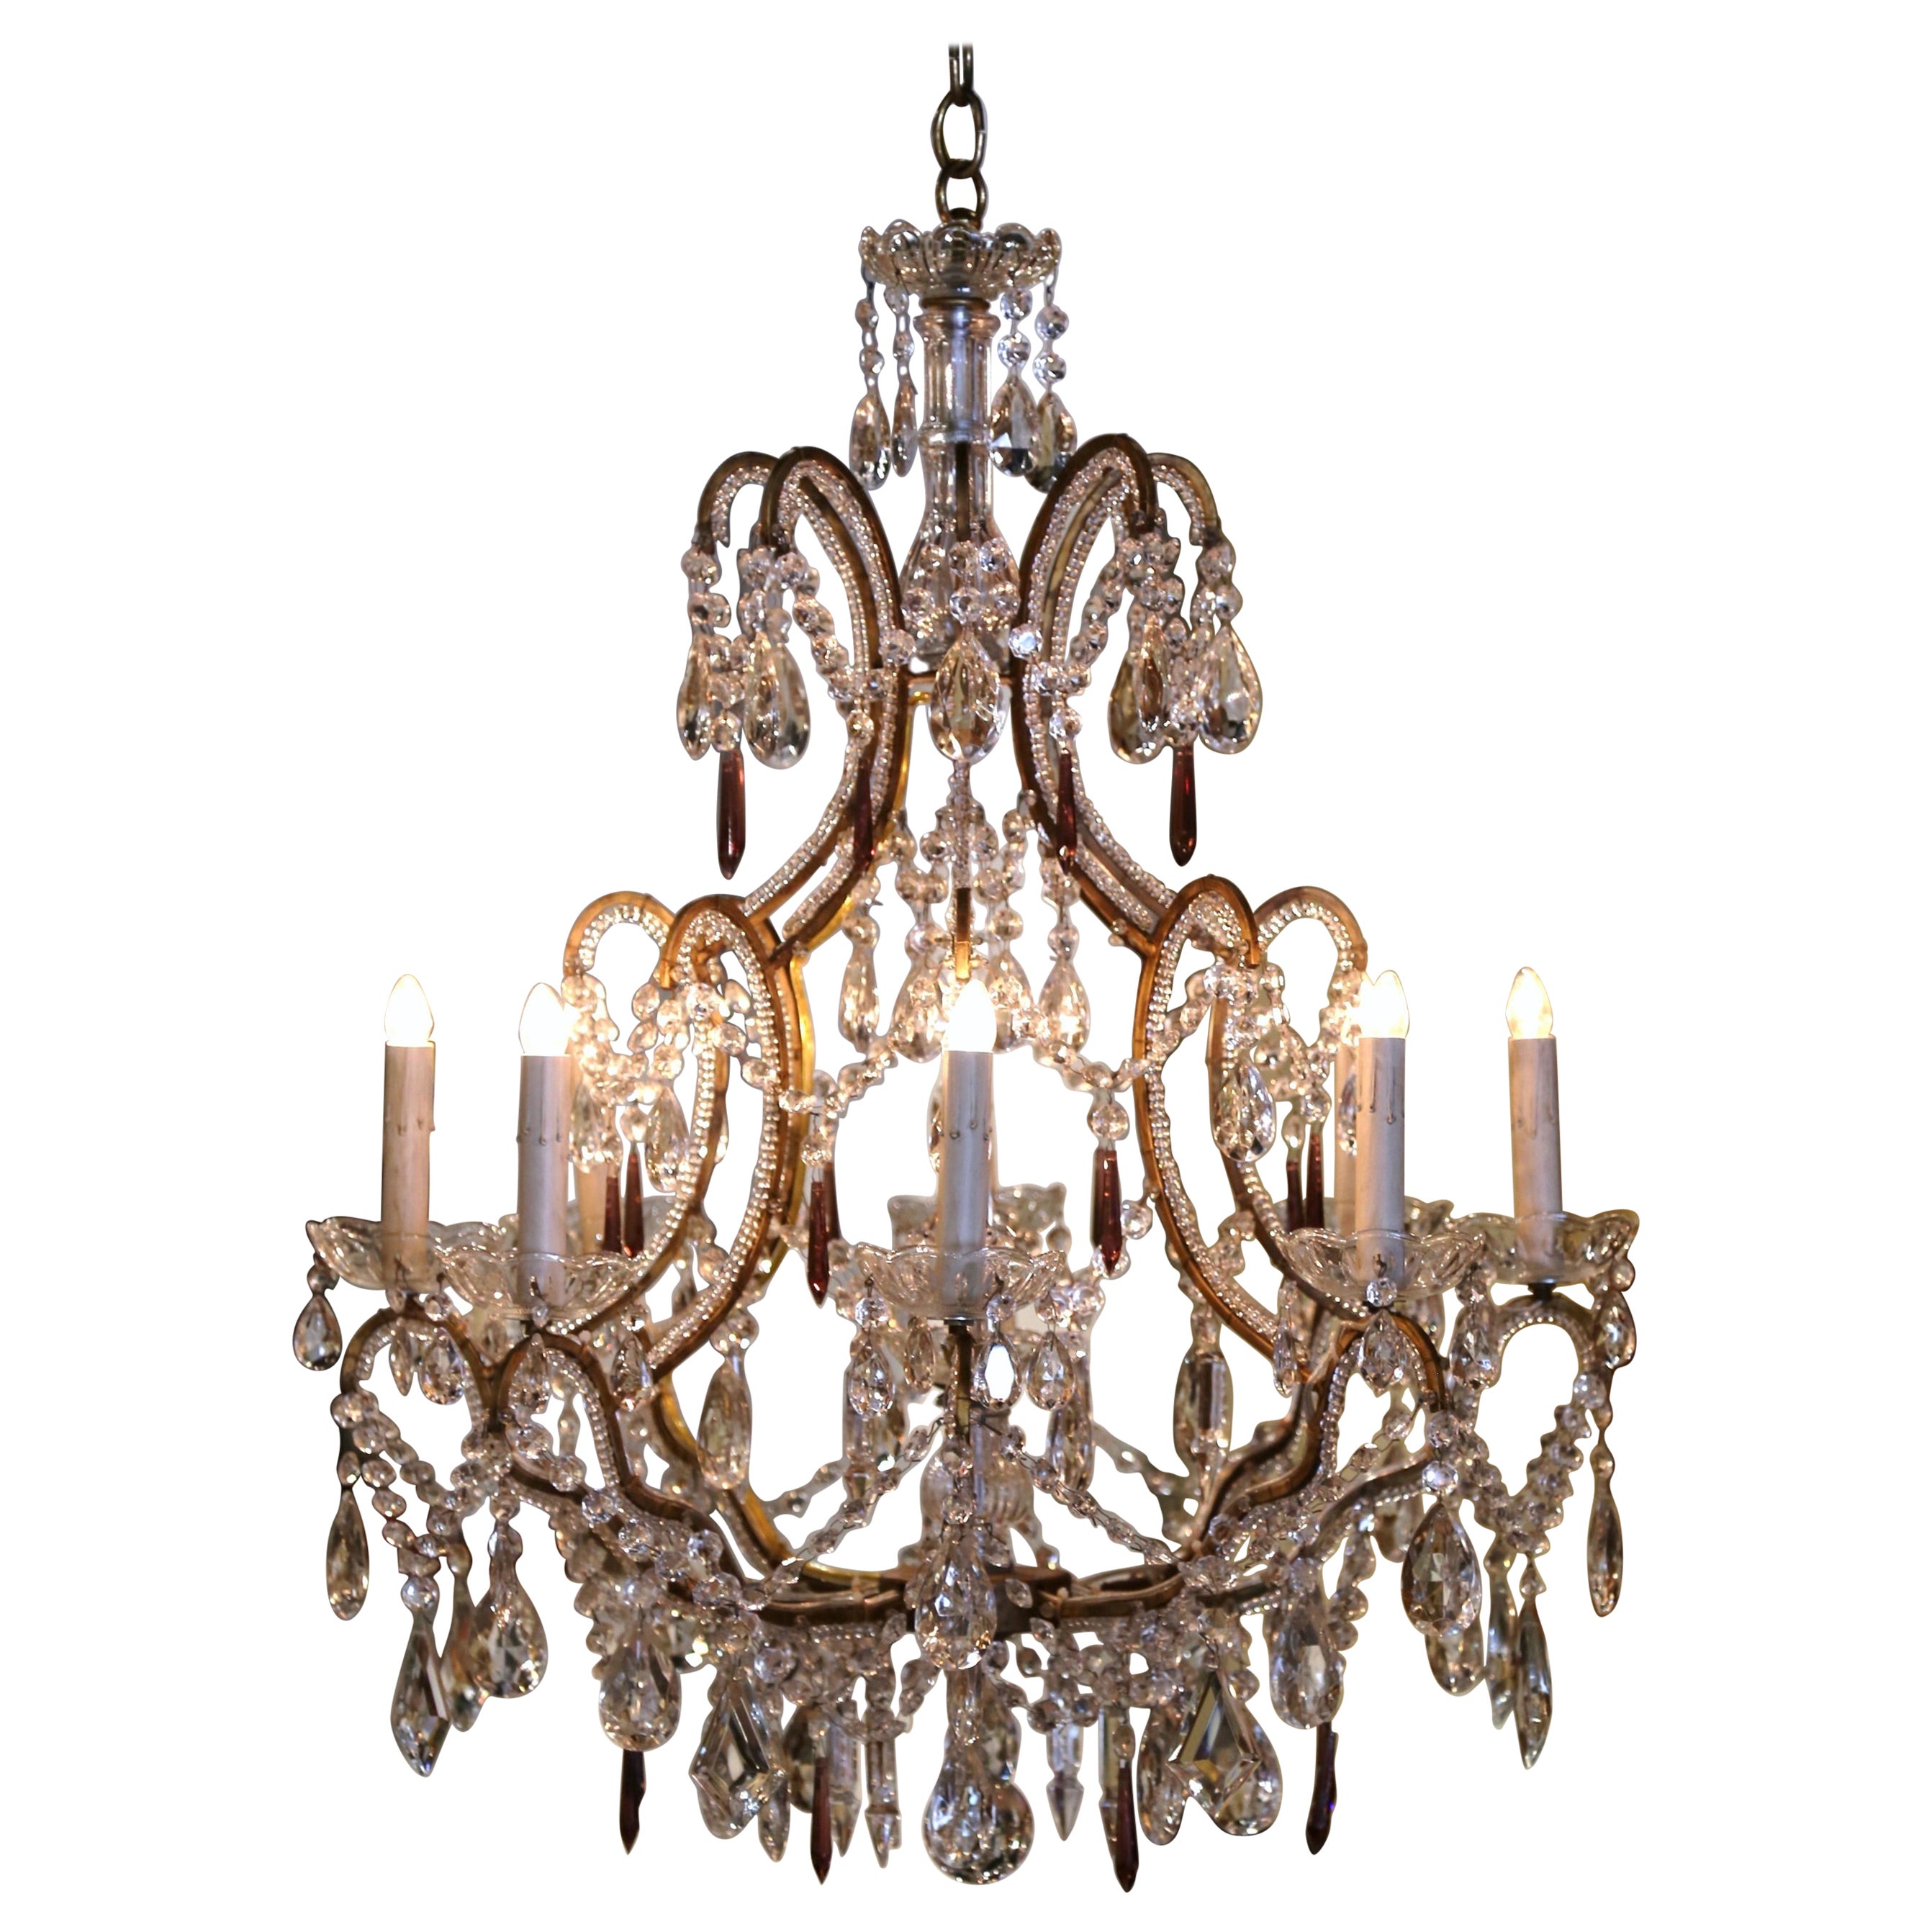 19th Century Italian Crystal and Brass Eight-Light Chandelier with Pendants